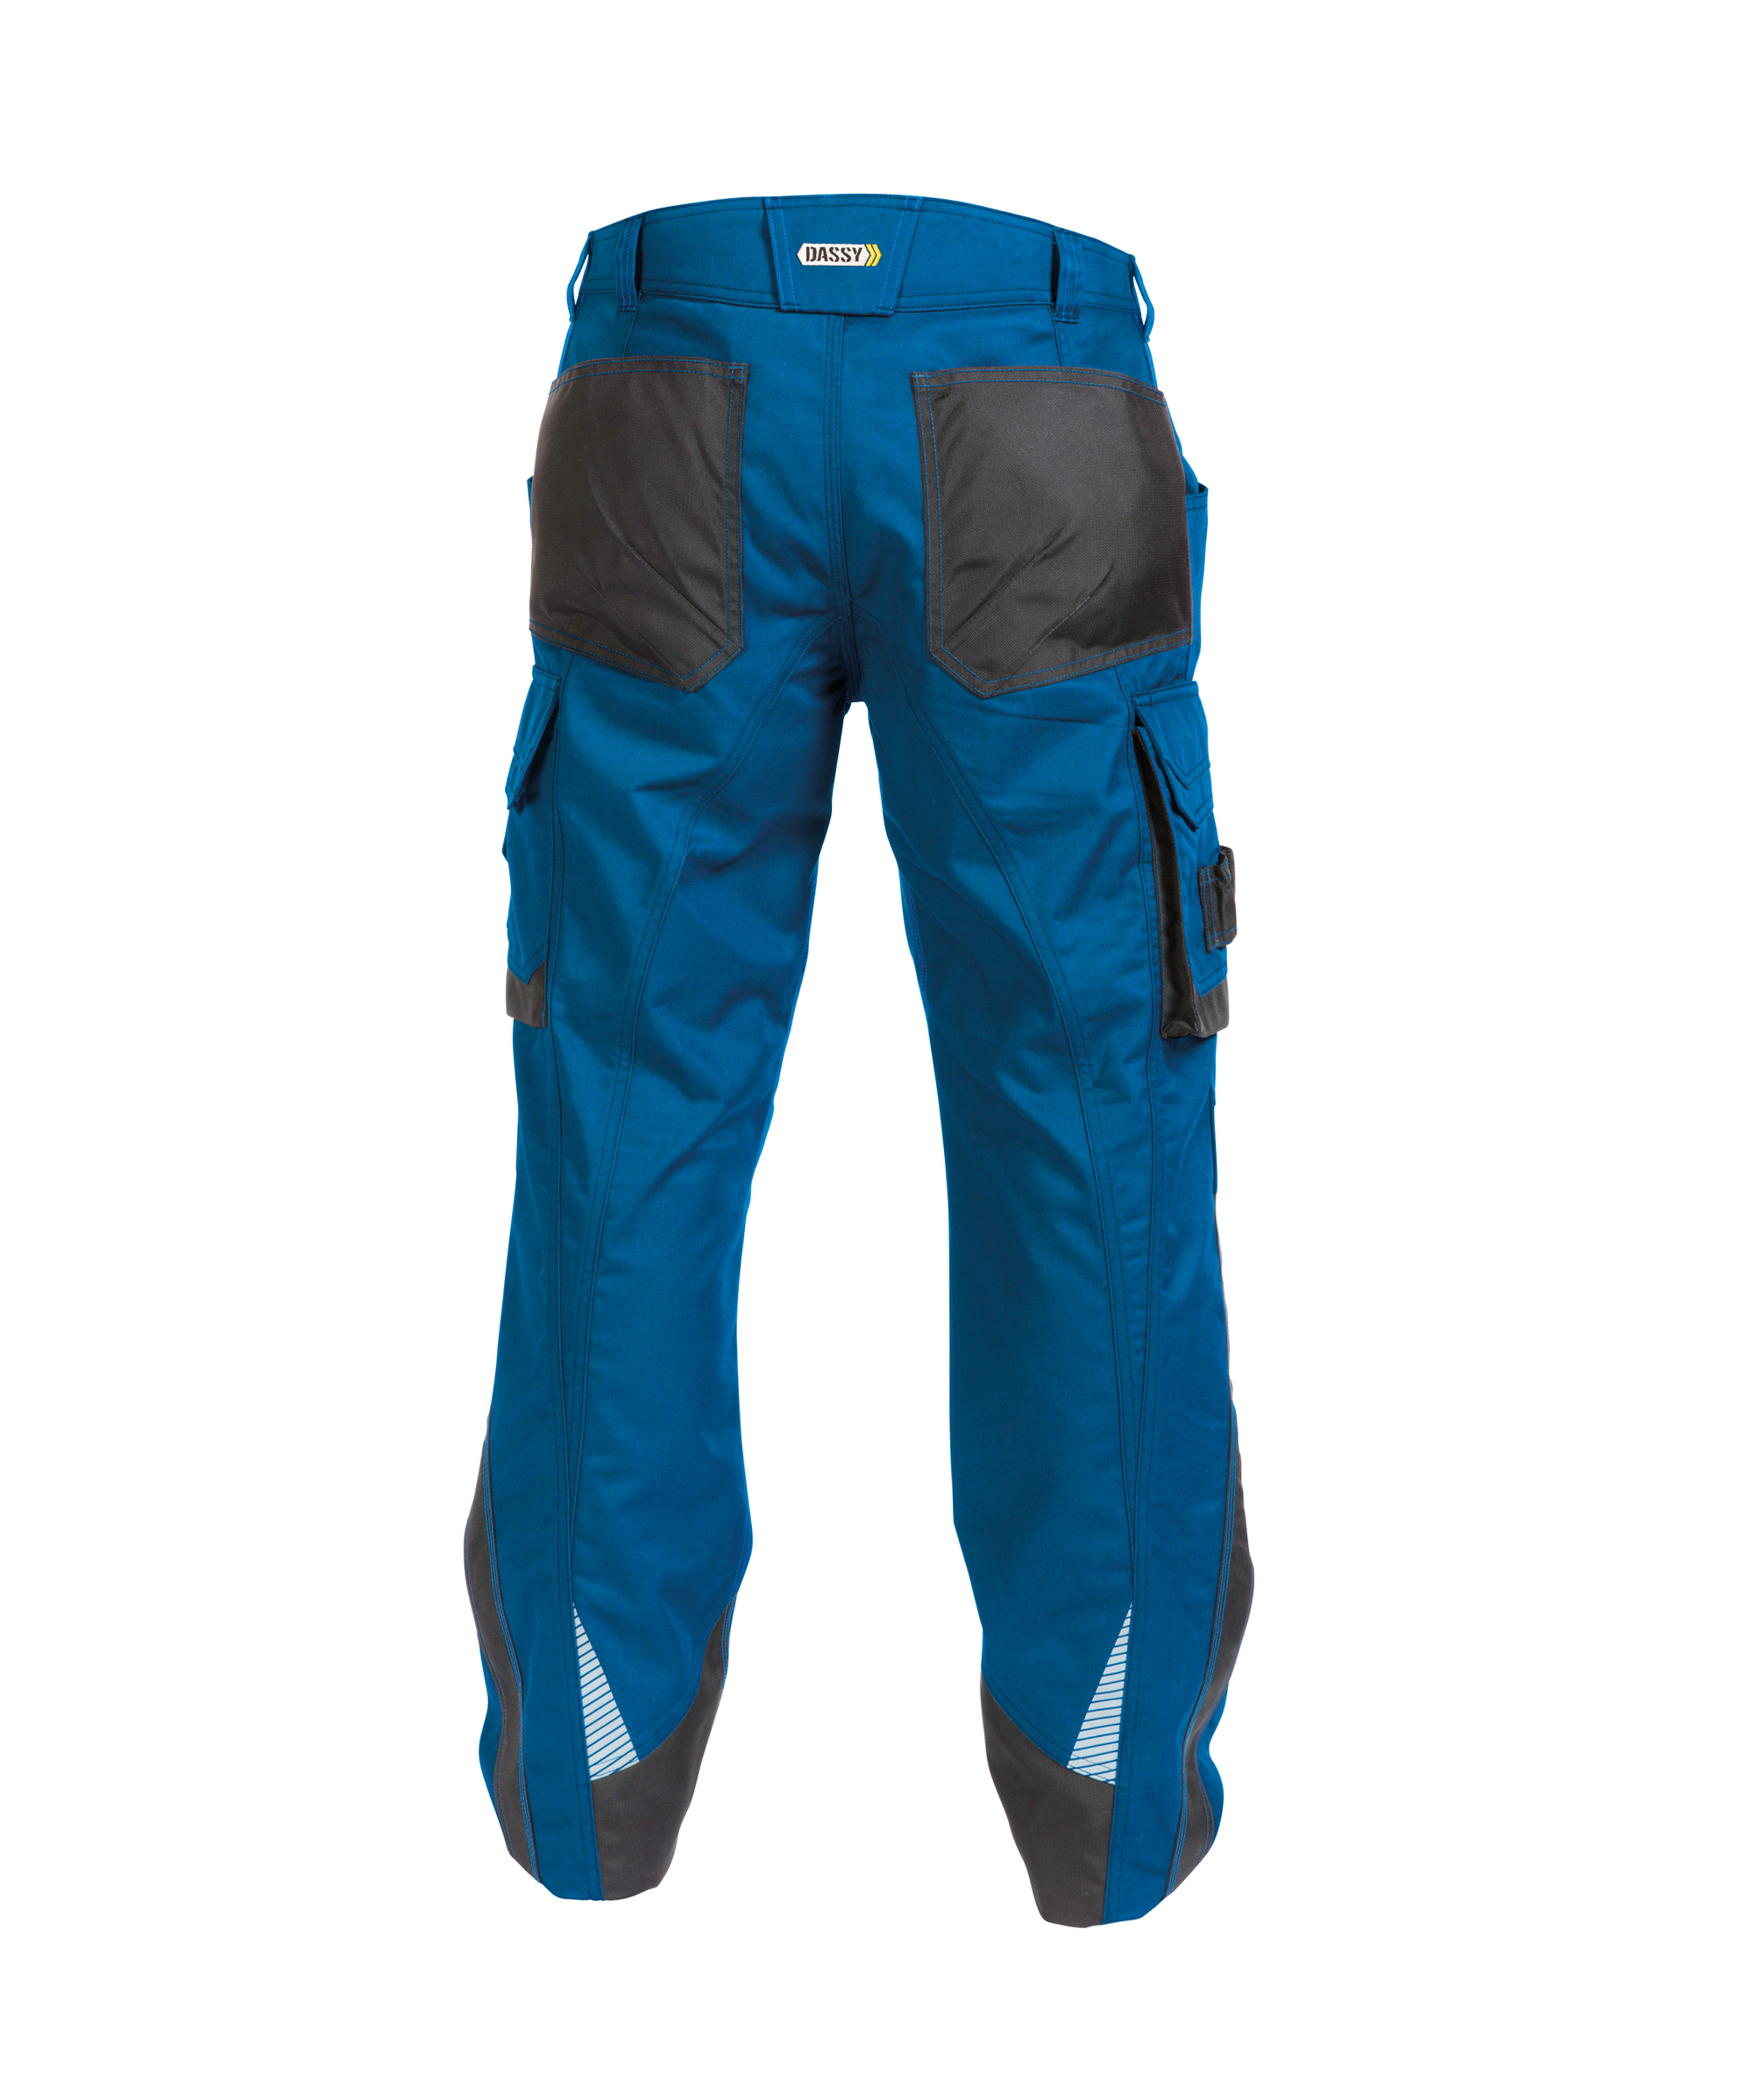 nova_two-tone-work-trousers-with-knee-pockets_azure-blue-anthracite-grey_back.jpg